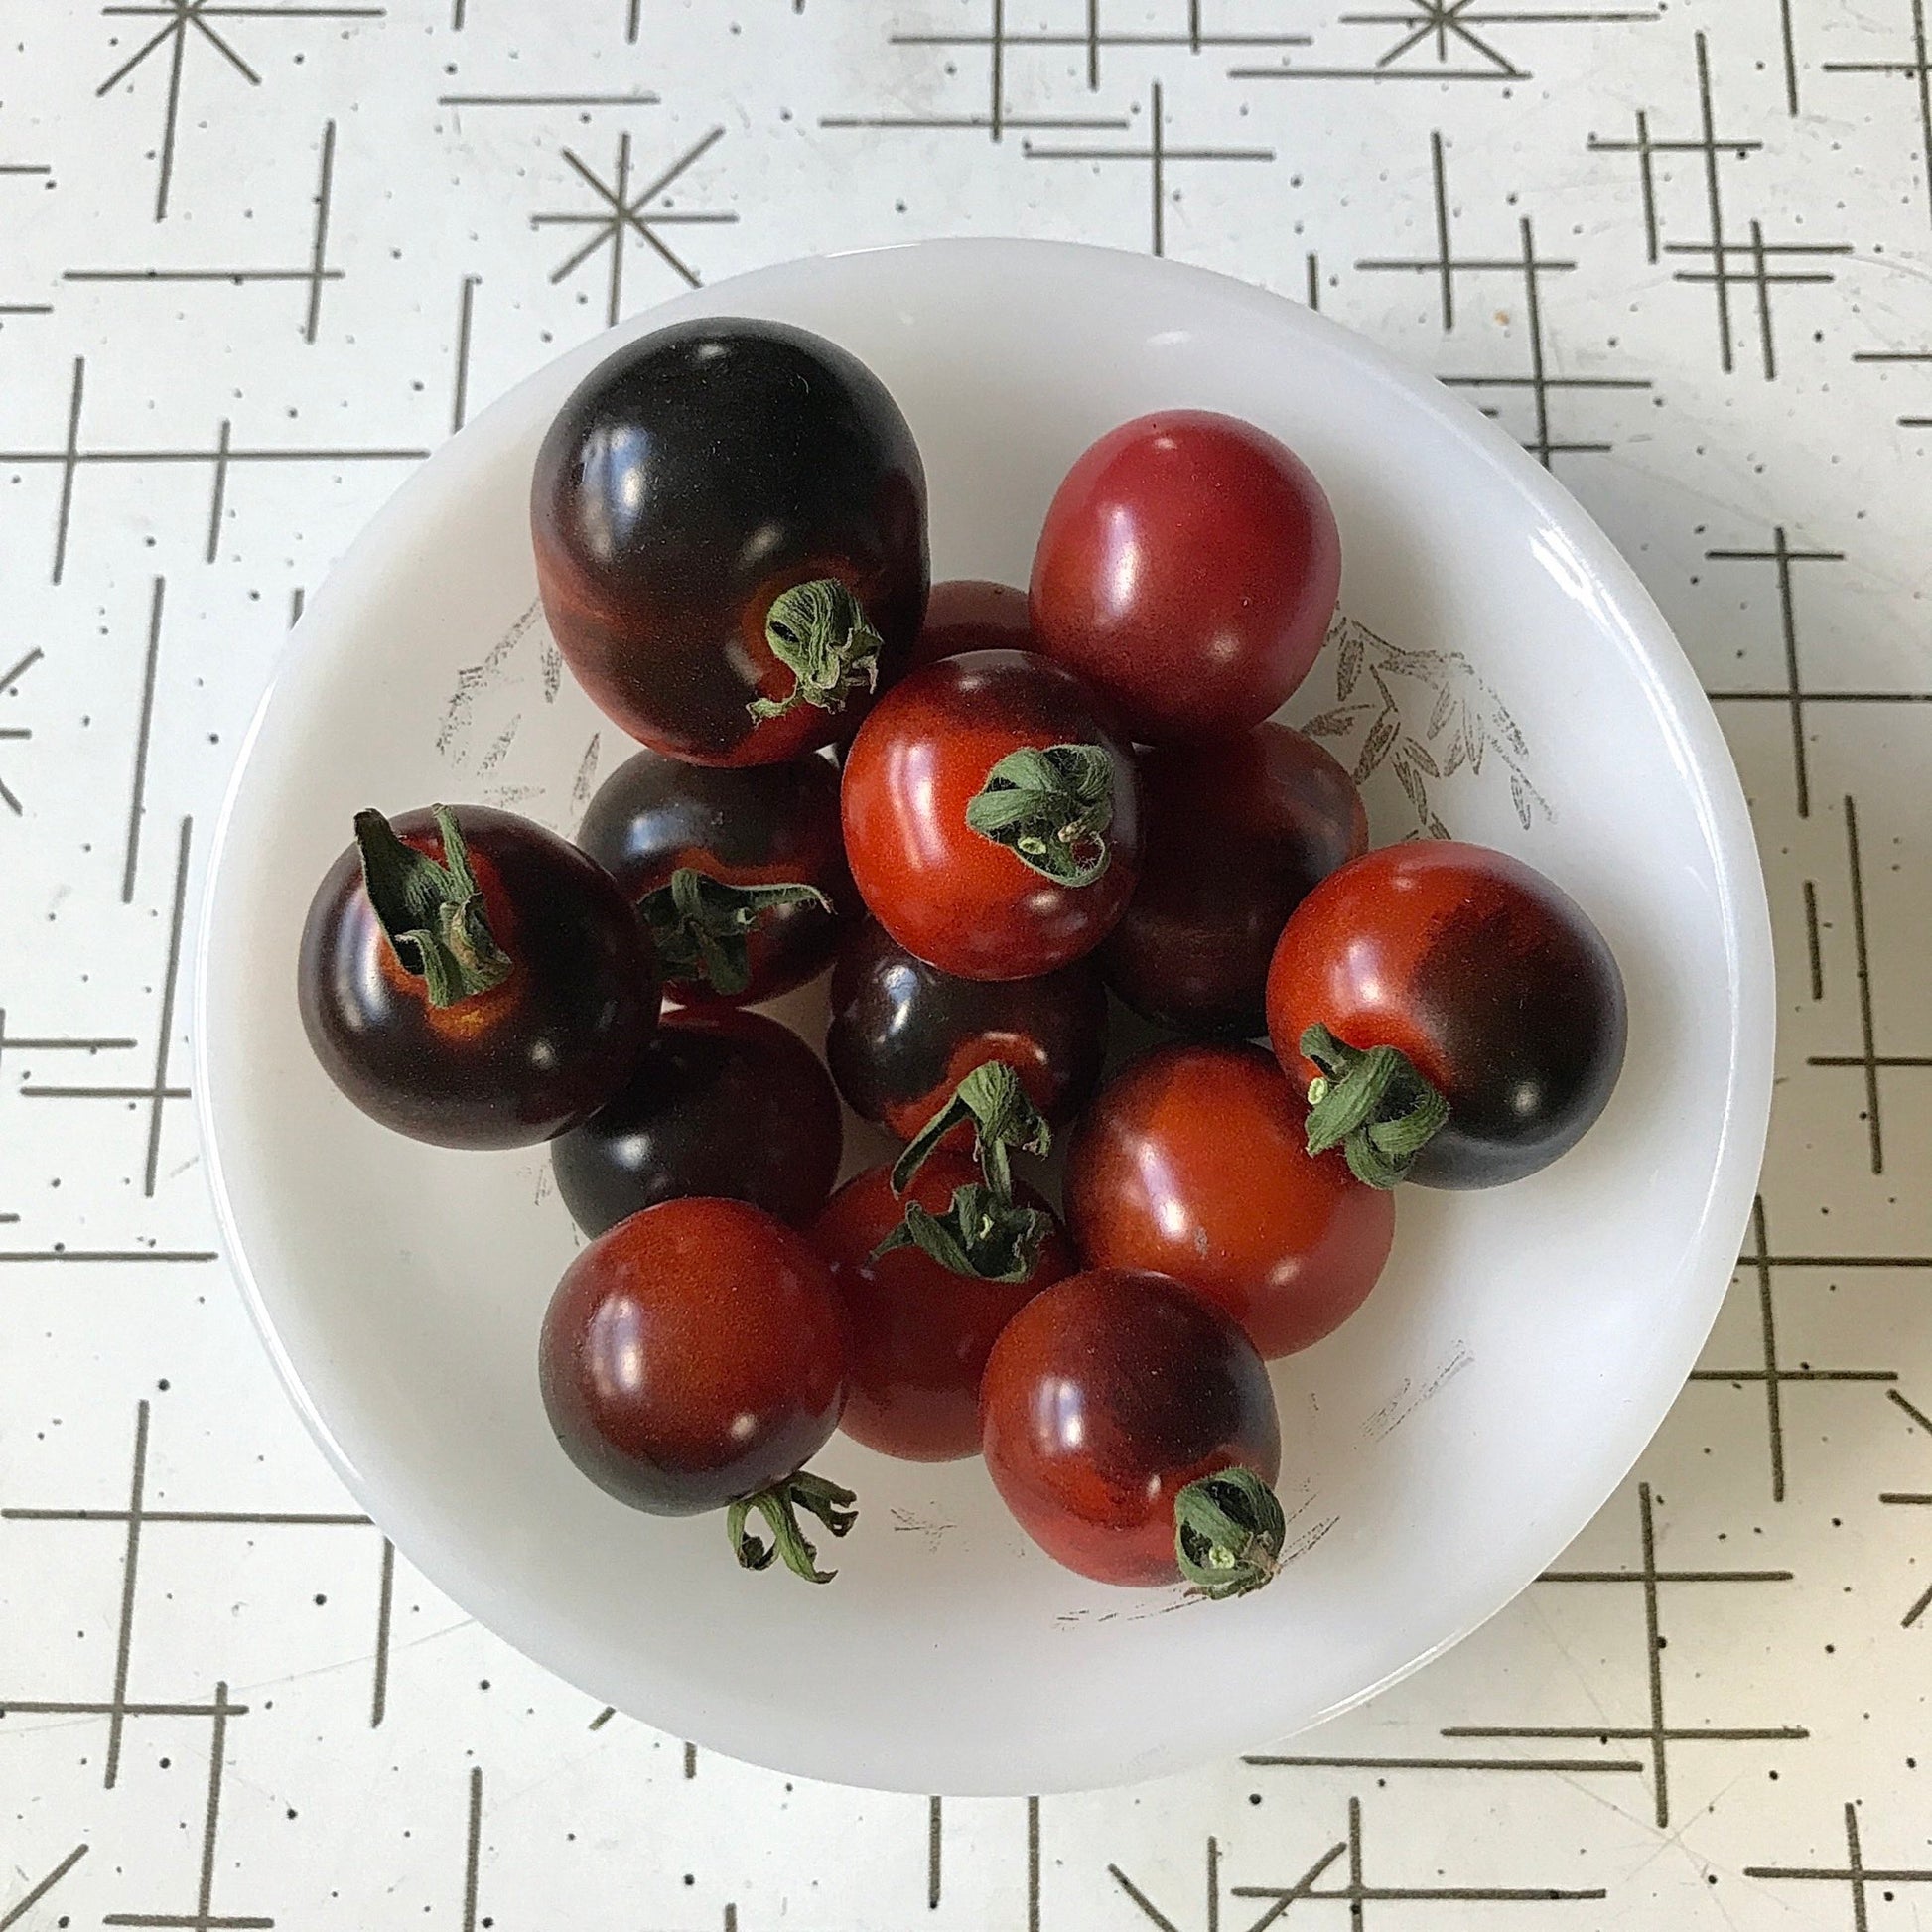 Red cherry tomatoes with antho shoulders in a small bowl.